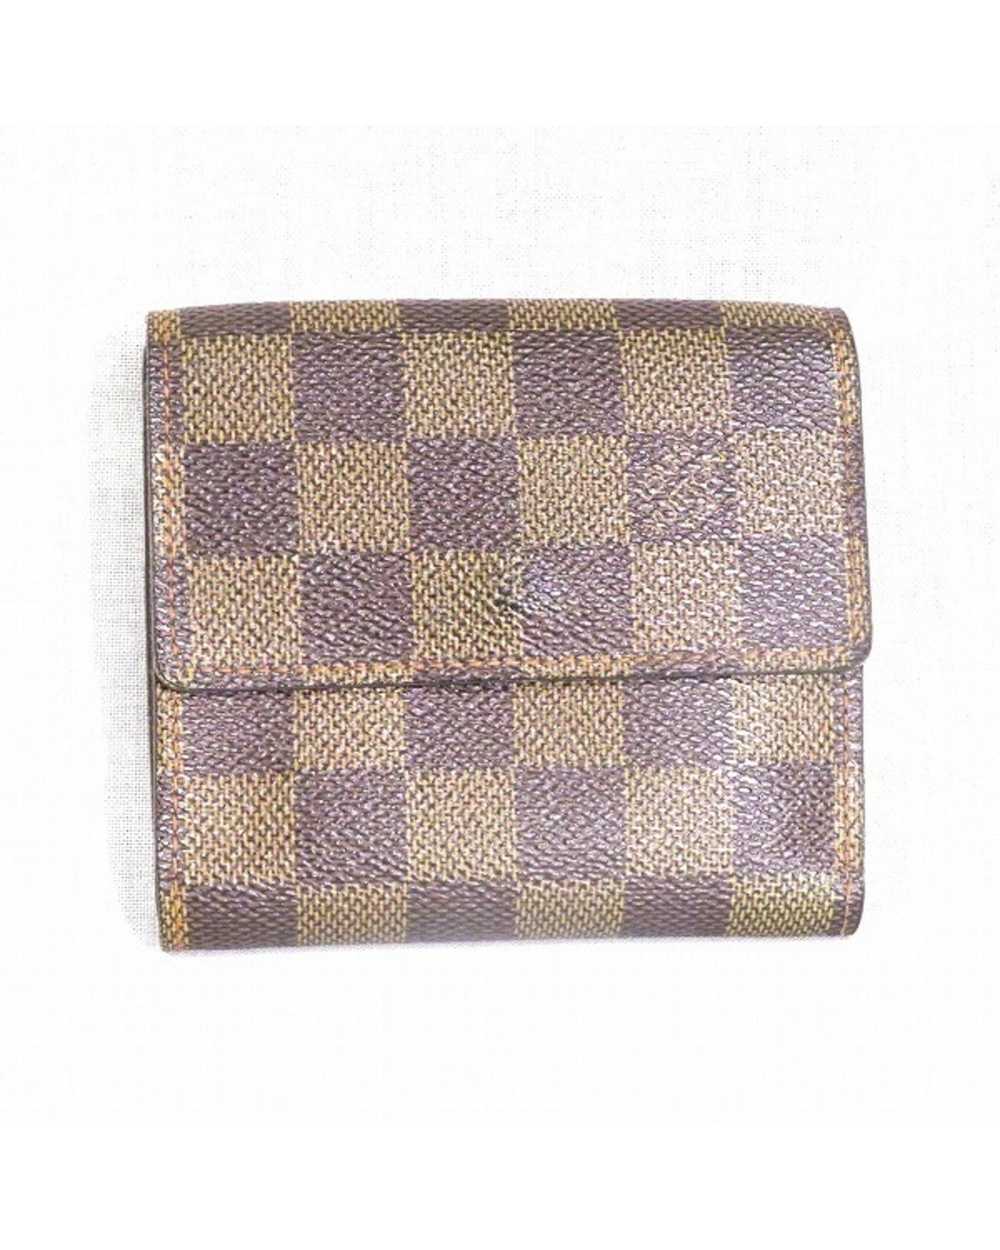 Louis Vuitton Sophisticated Leather Card Holder - image 1